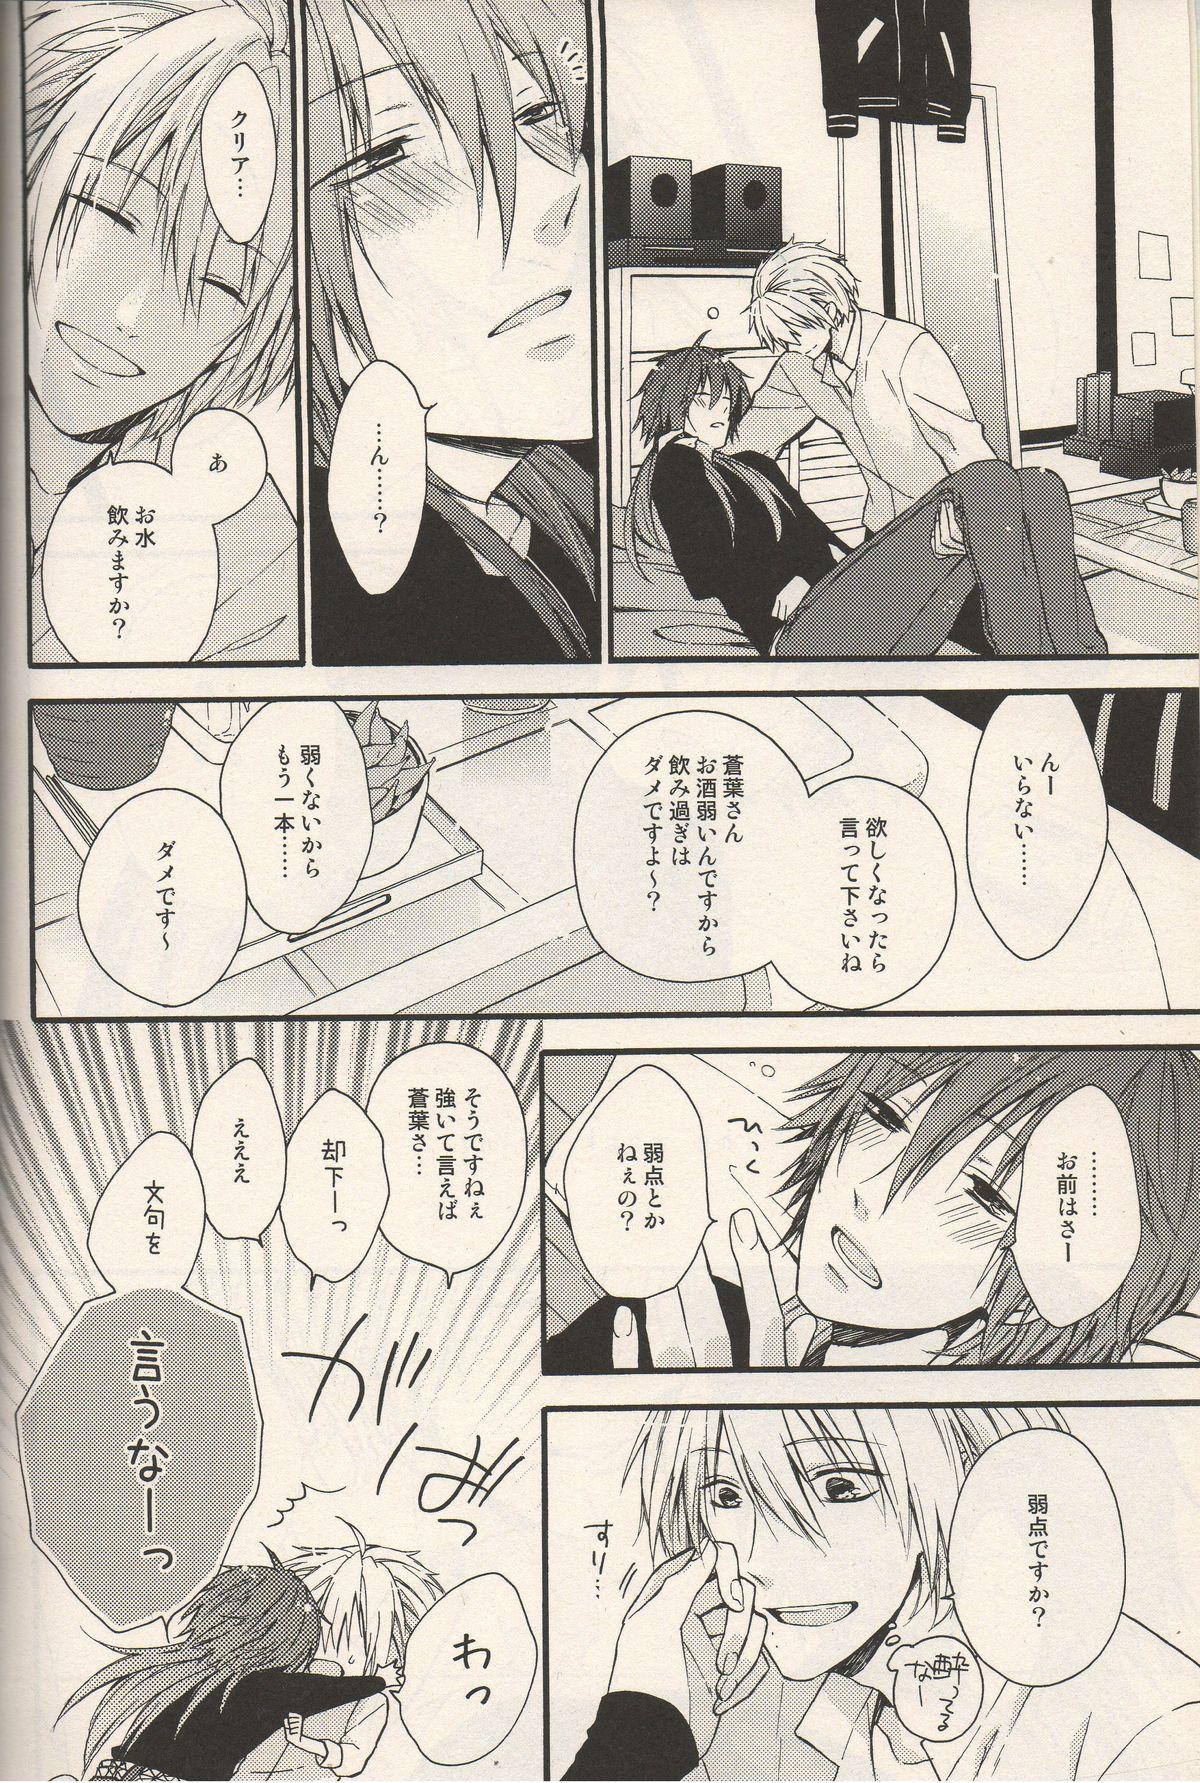 Xxx The Story About You - Dramatical murder Reverse Cowgirl - Page 6